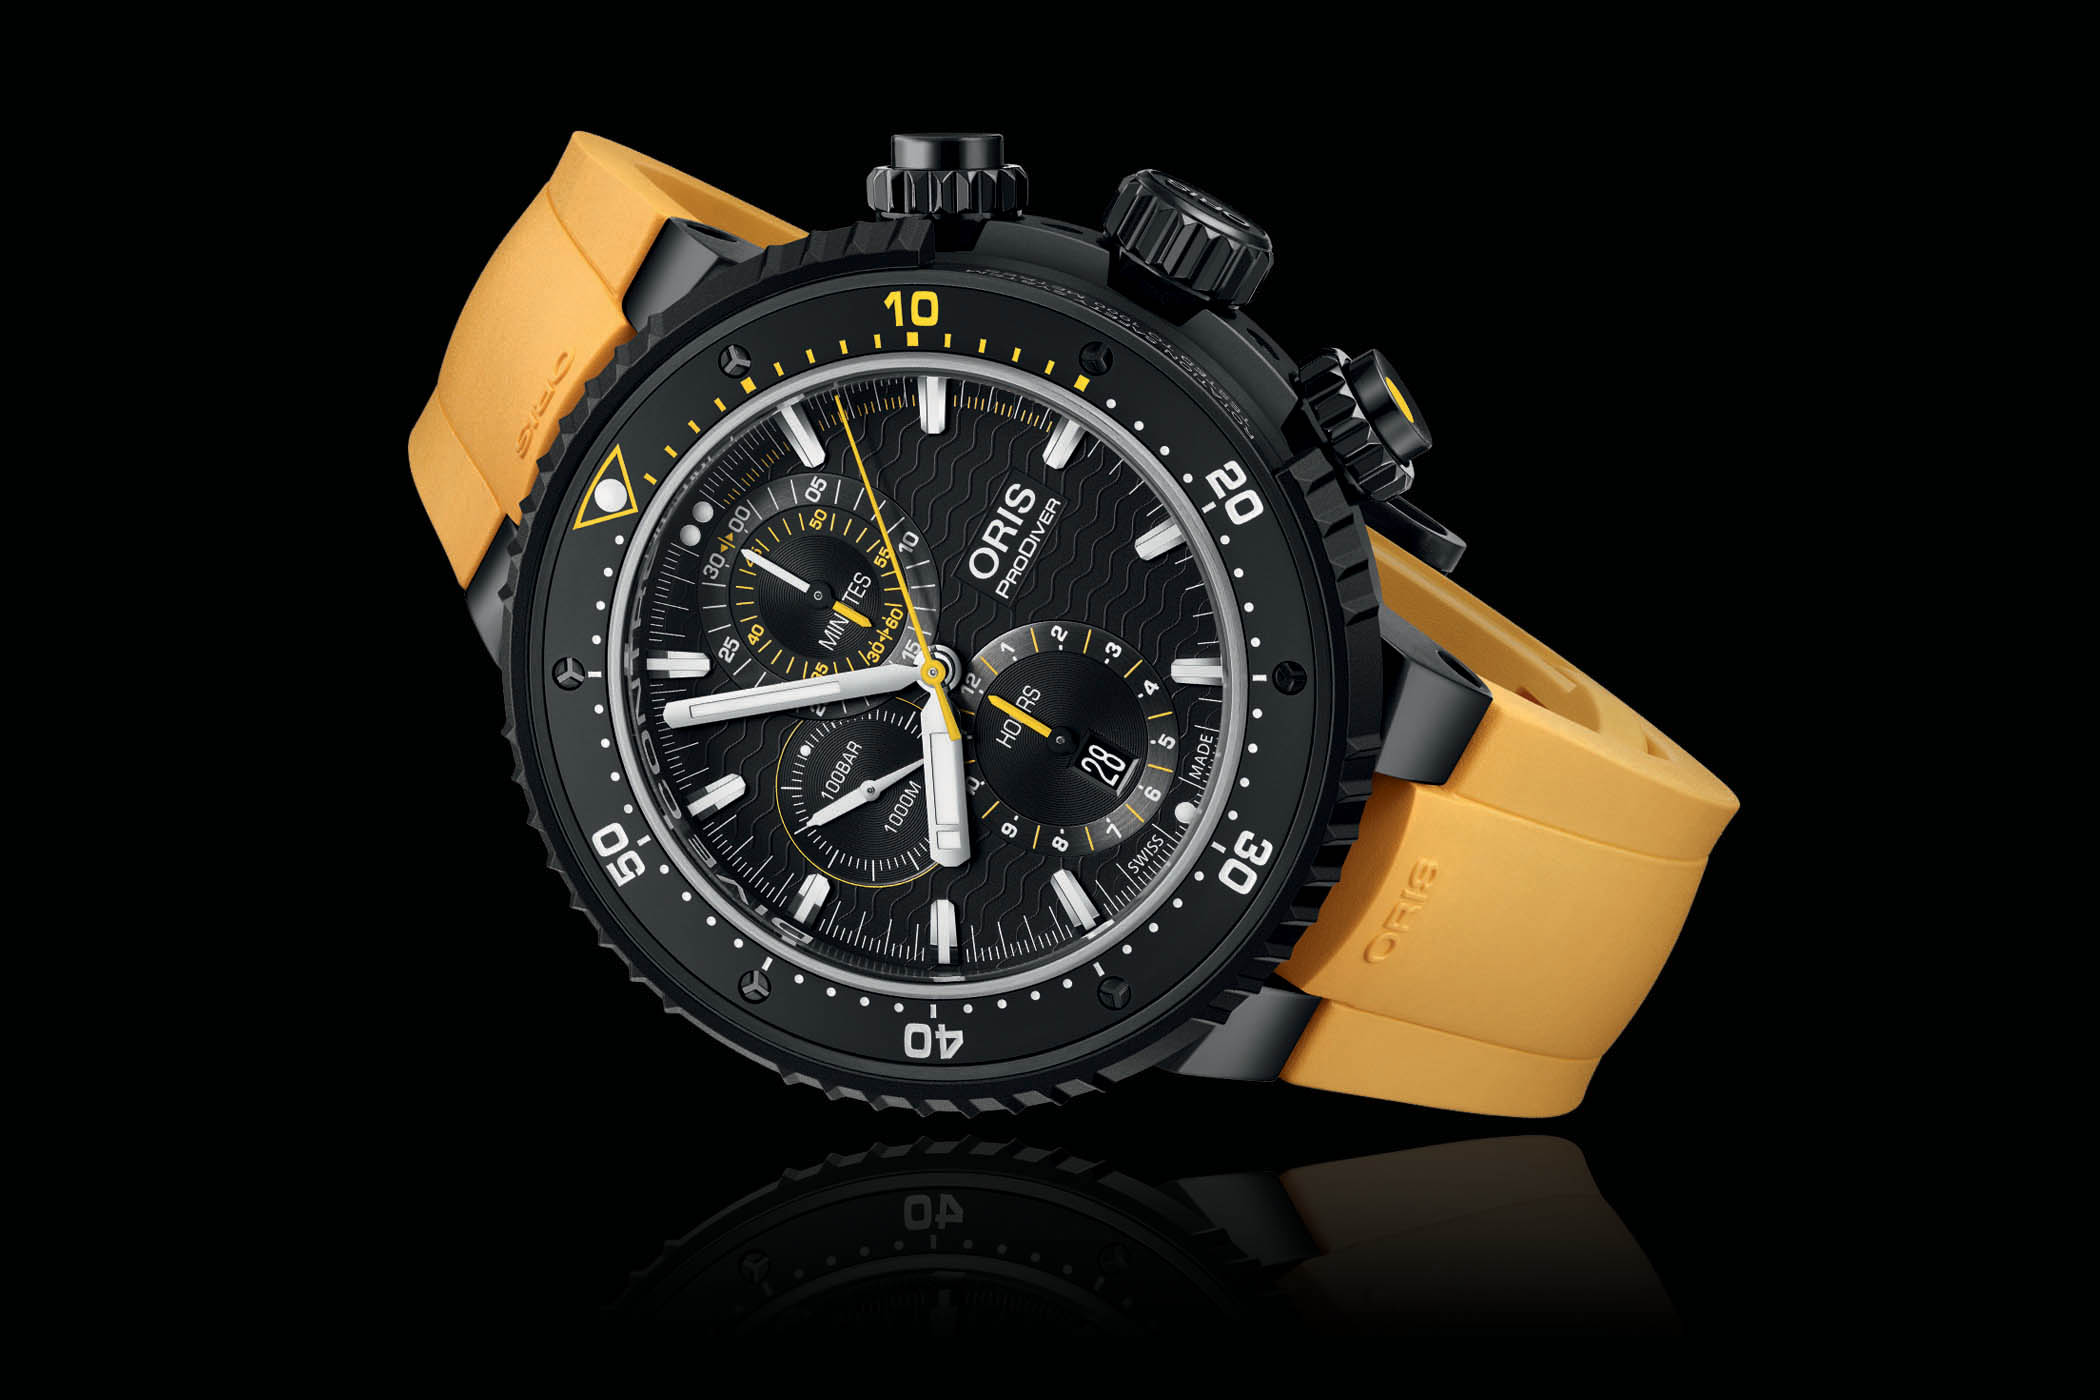 Introducing Oris Dive Control Limited Edition 1000m chronograph